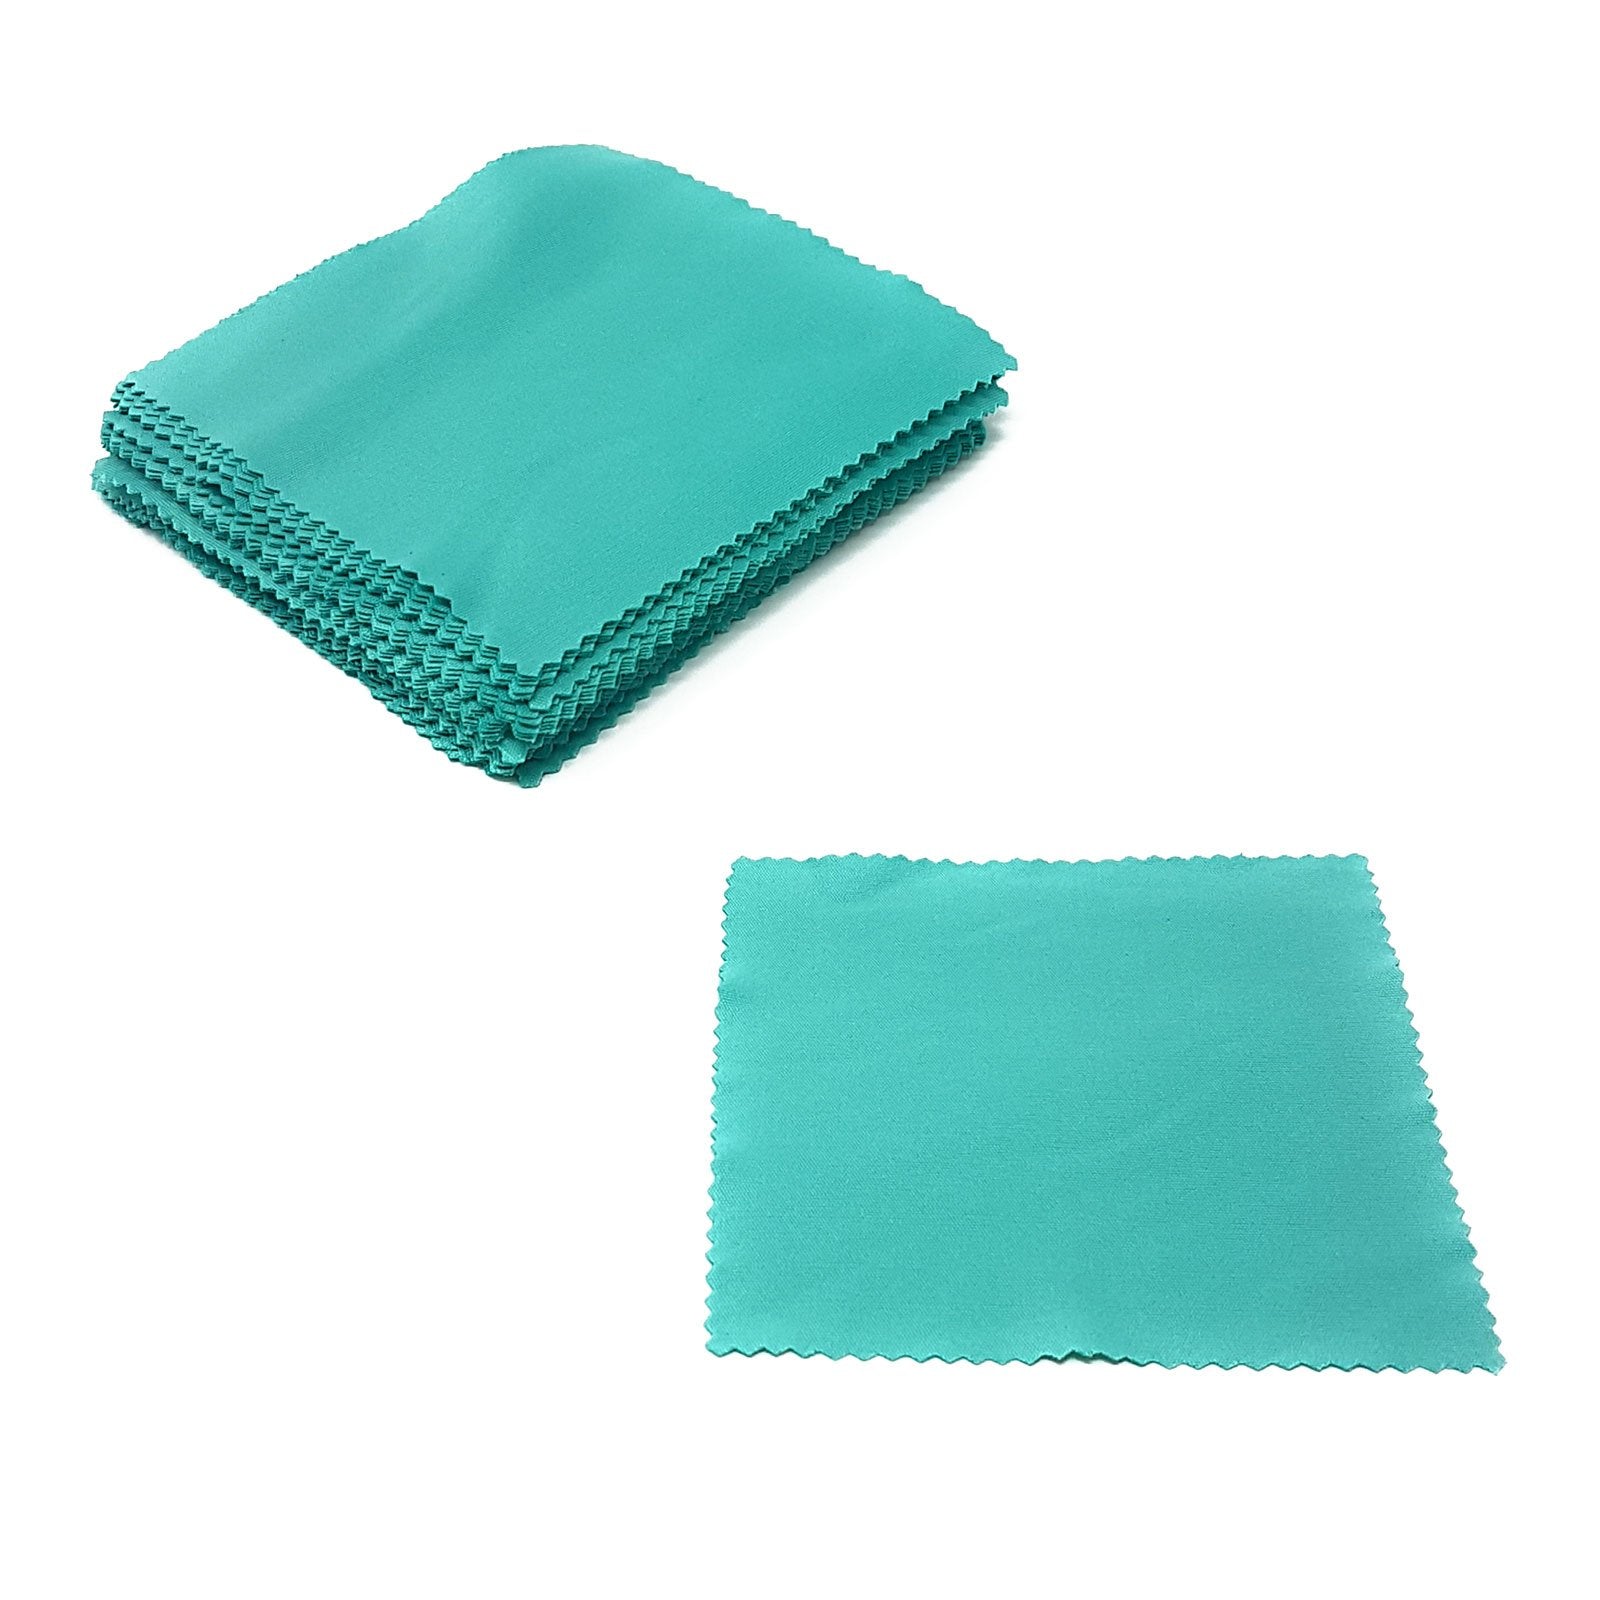 Wholesale Lens Cleaning Cloths - Green